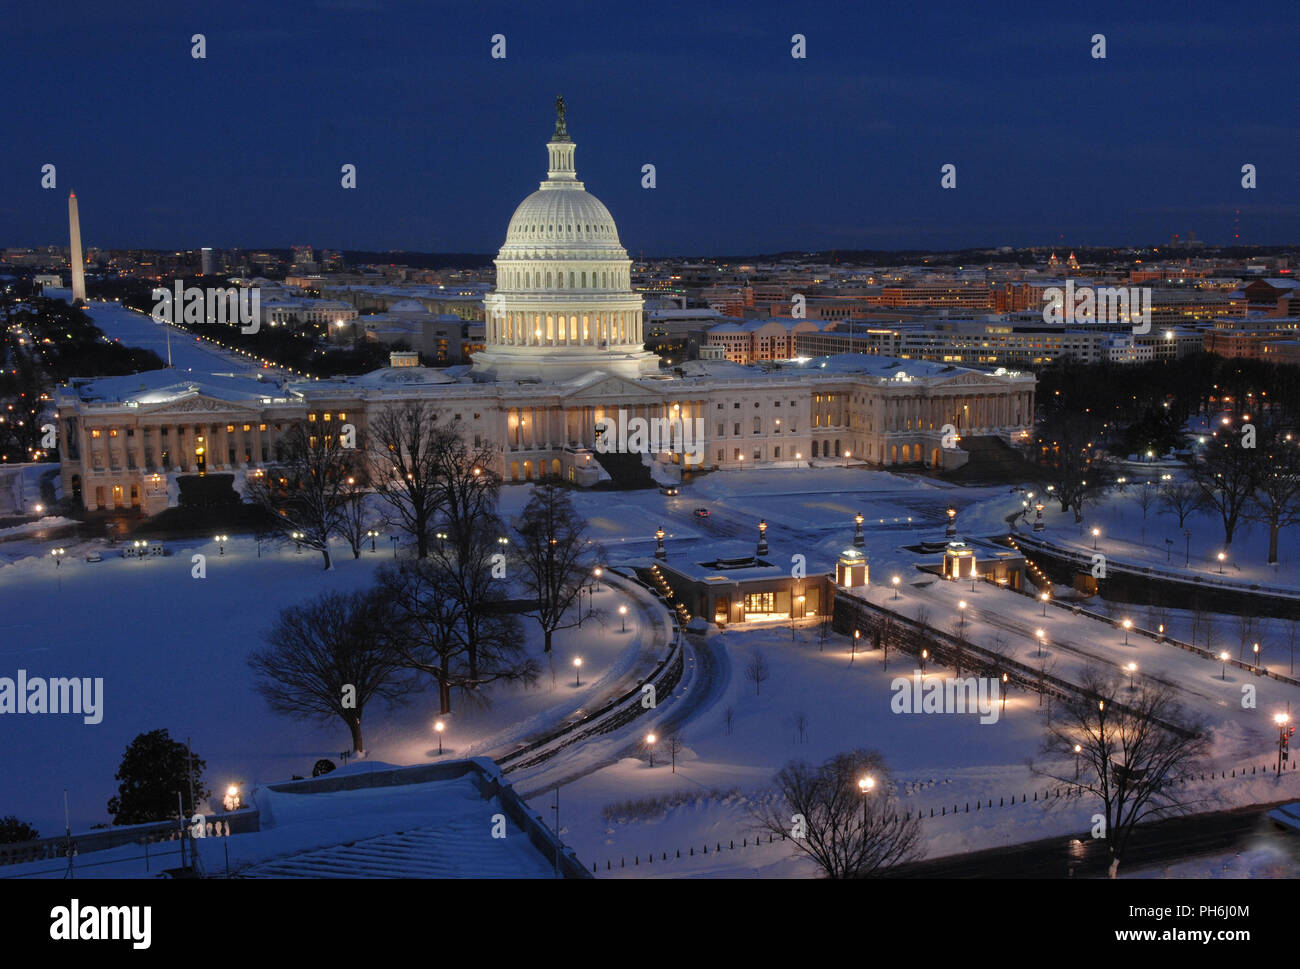 The D.C. metro area experienced one of its snowiest in history during the Winter of 2009-2010 with a total of five or more feet of snow across much of the DC area. In the February 'Snowmageddon' storm alone, Stock Photo